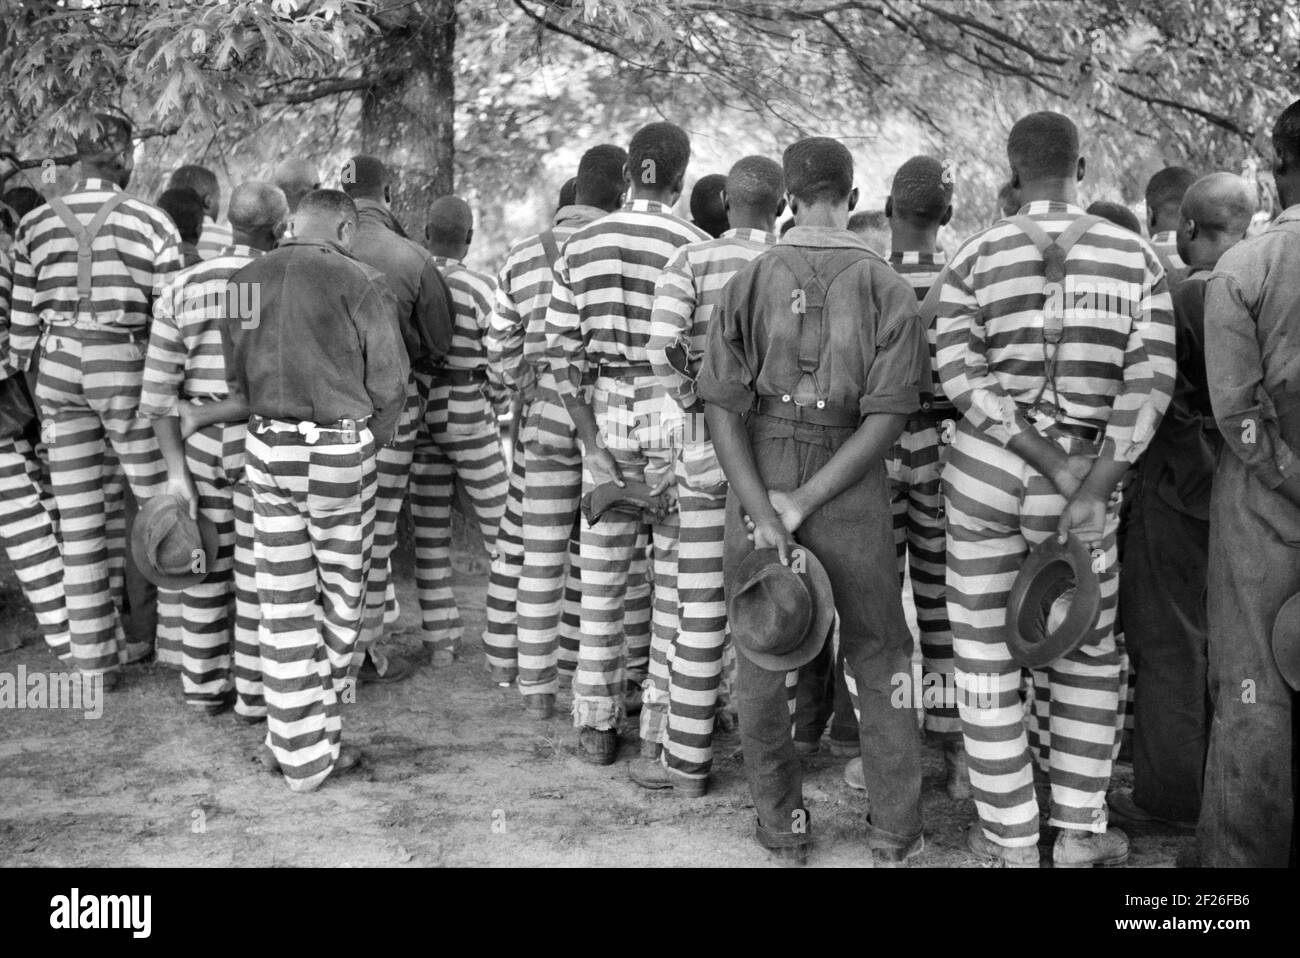 Convicts from Prison Camp at Funeral of their Warden who was killed in Automobile Accident, Greene County, Georgia, USA, Jack Delano, U.S. Farm Security Administration, May 1941 Stock Photo